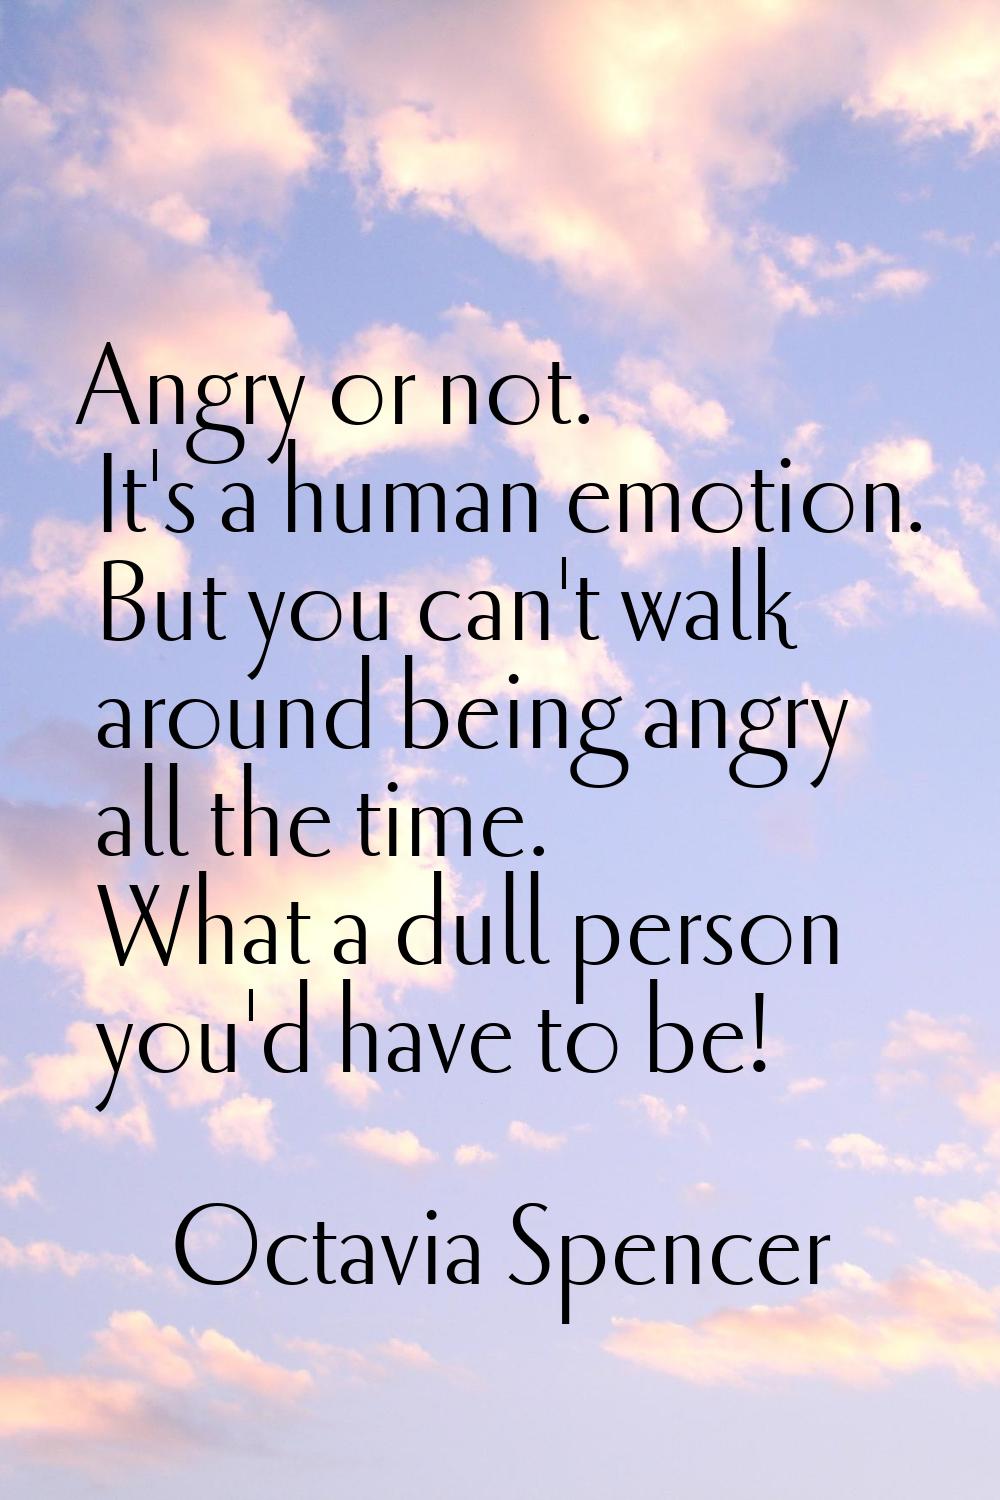 Angry or not. It's a human emotion. But you can't walk around being angry all the time. What a dull